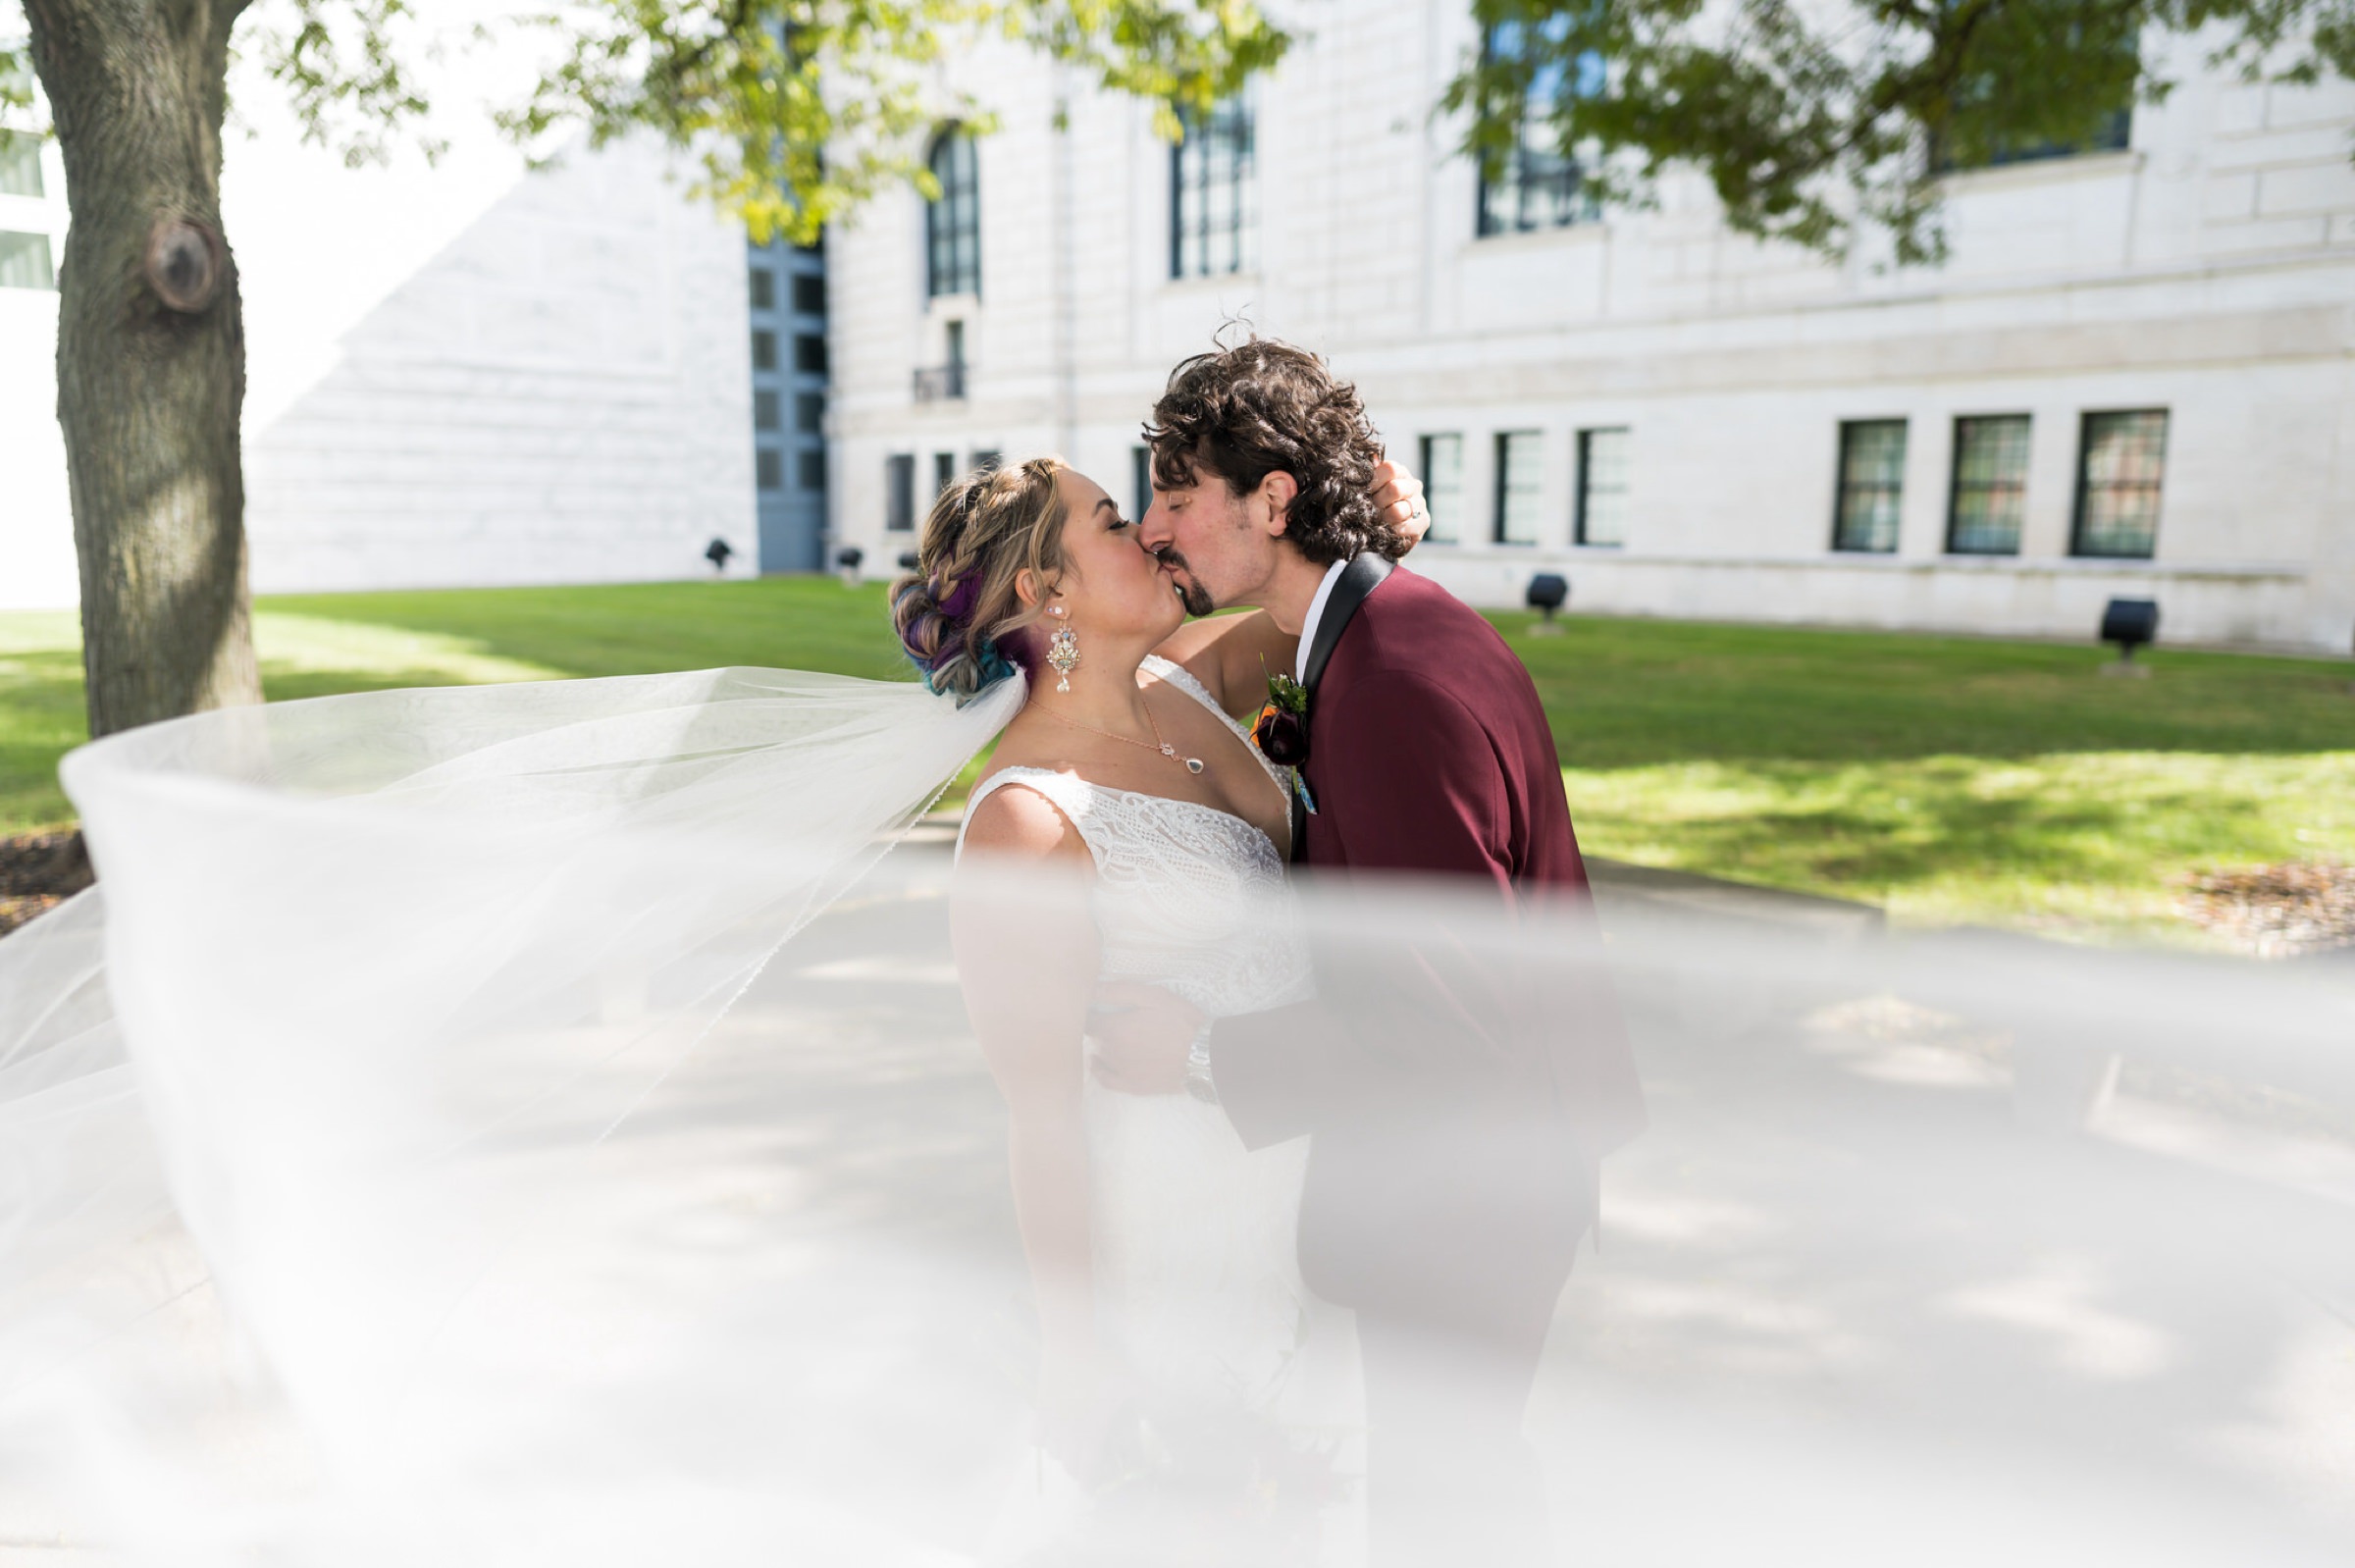 A bride and groom kiss outside of the DIA in Detroit on their wedding day.  